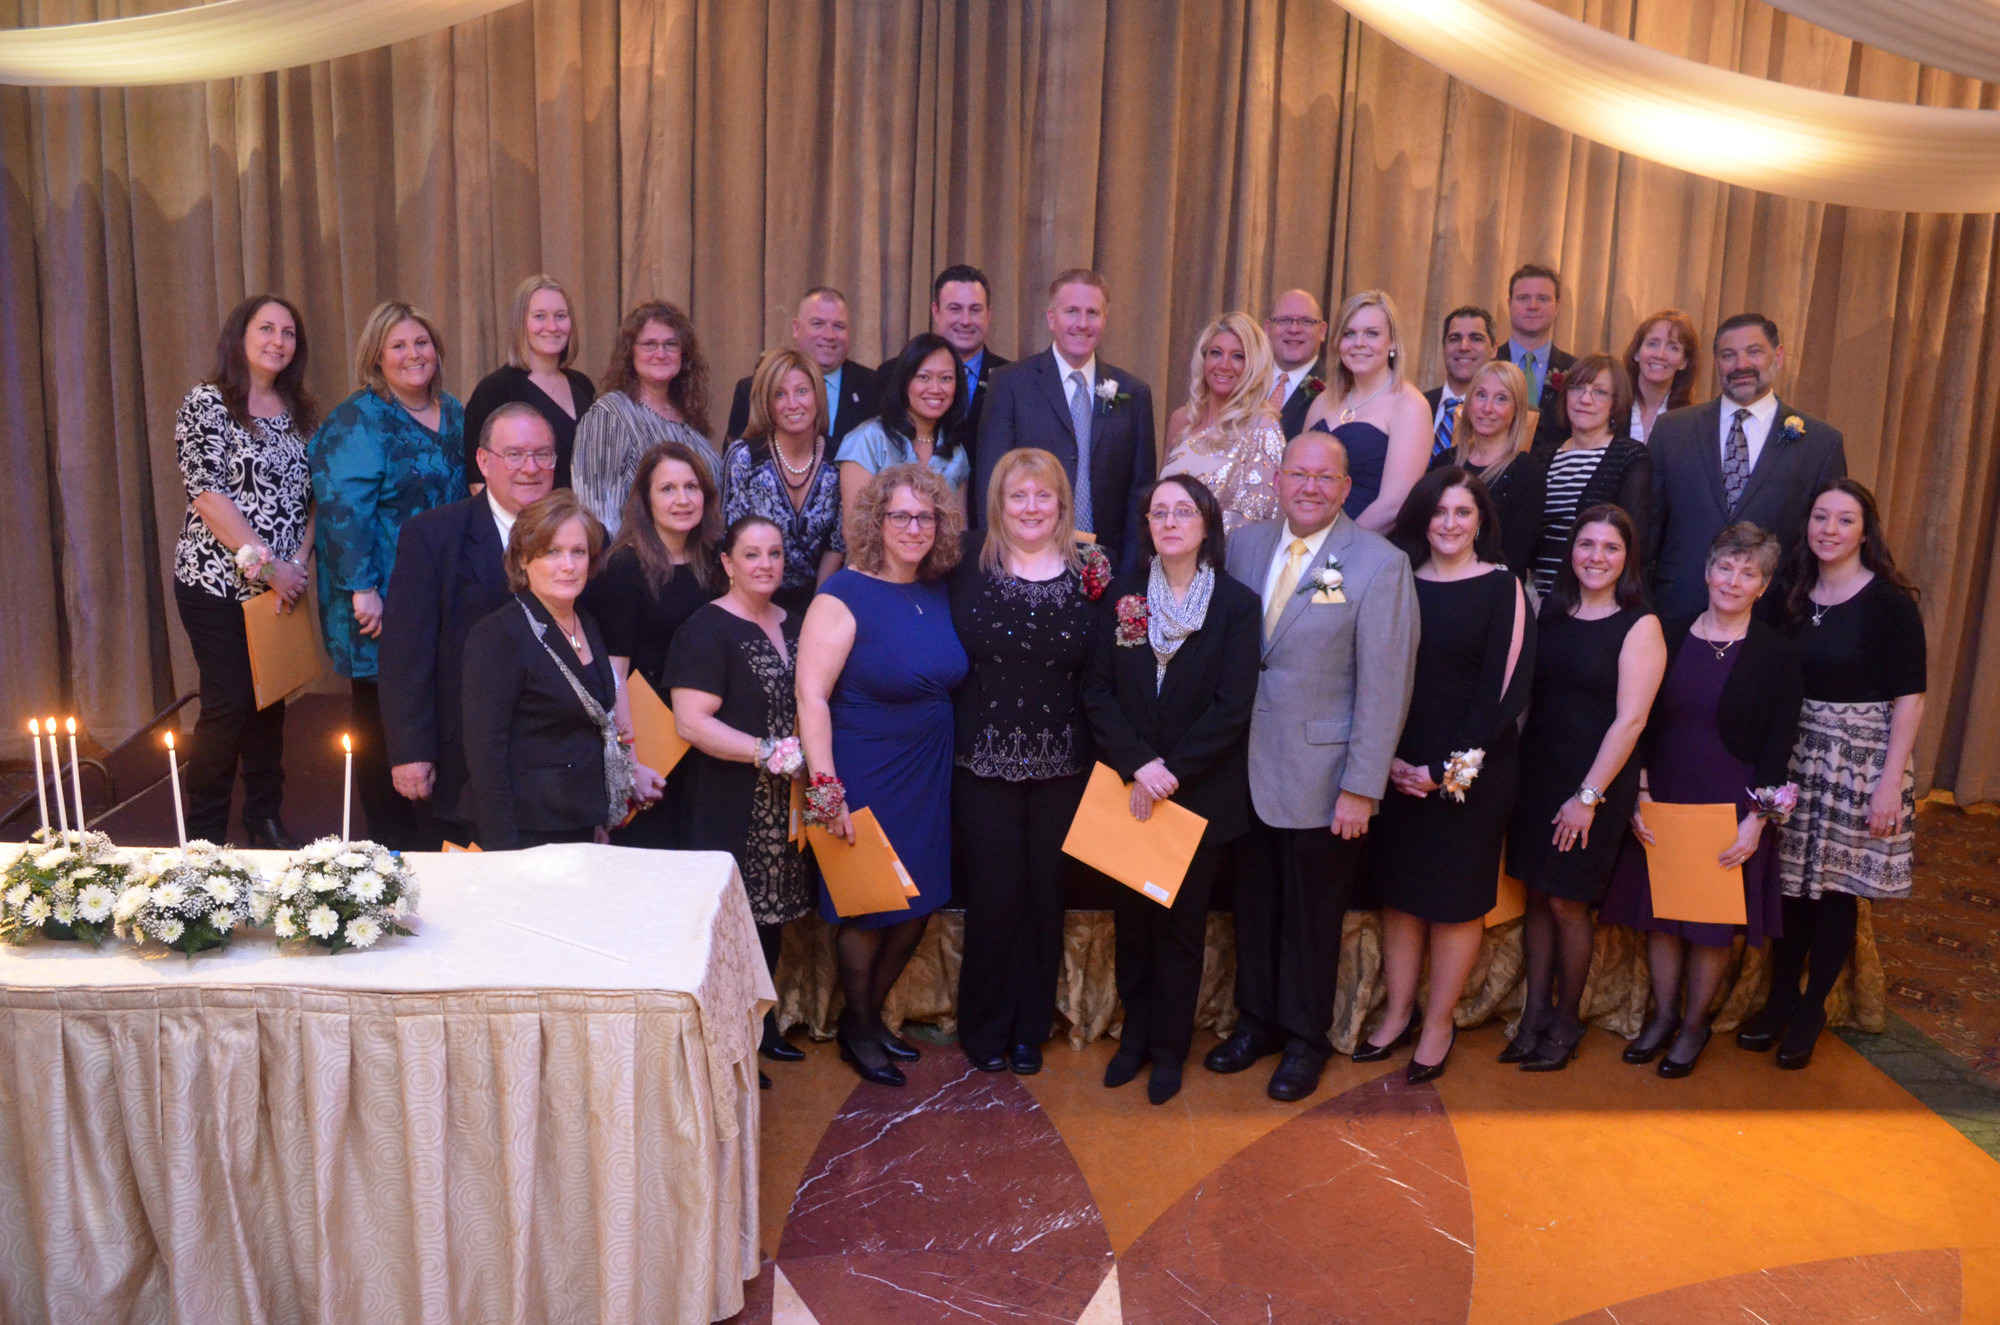 Representatives from each school's PTA -- and SEPTA -- were honored at the Founders Day ceremony.